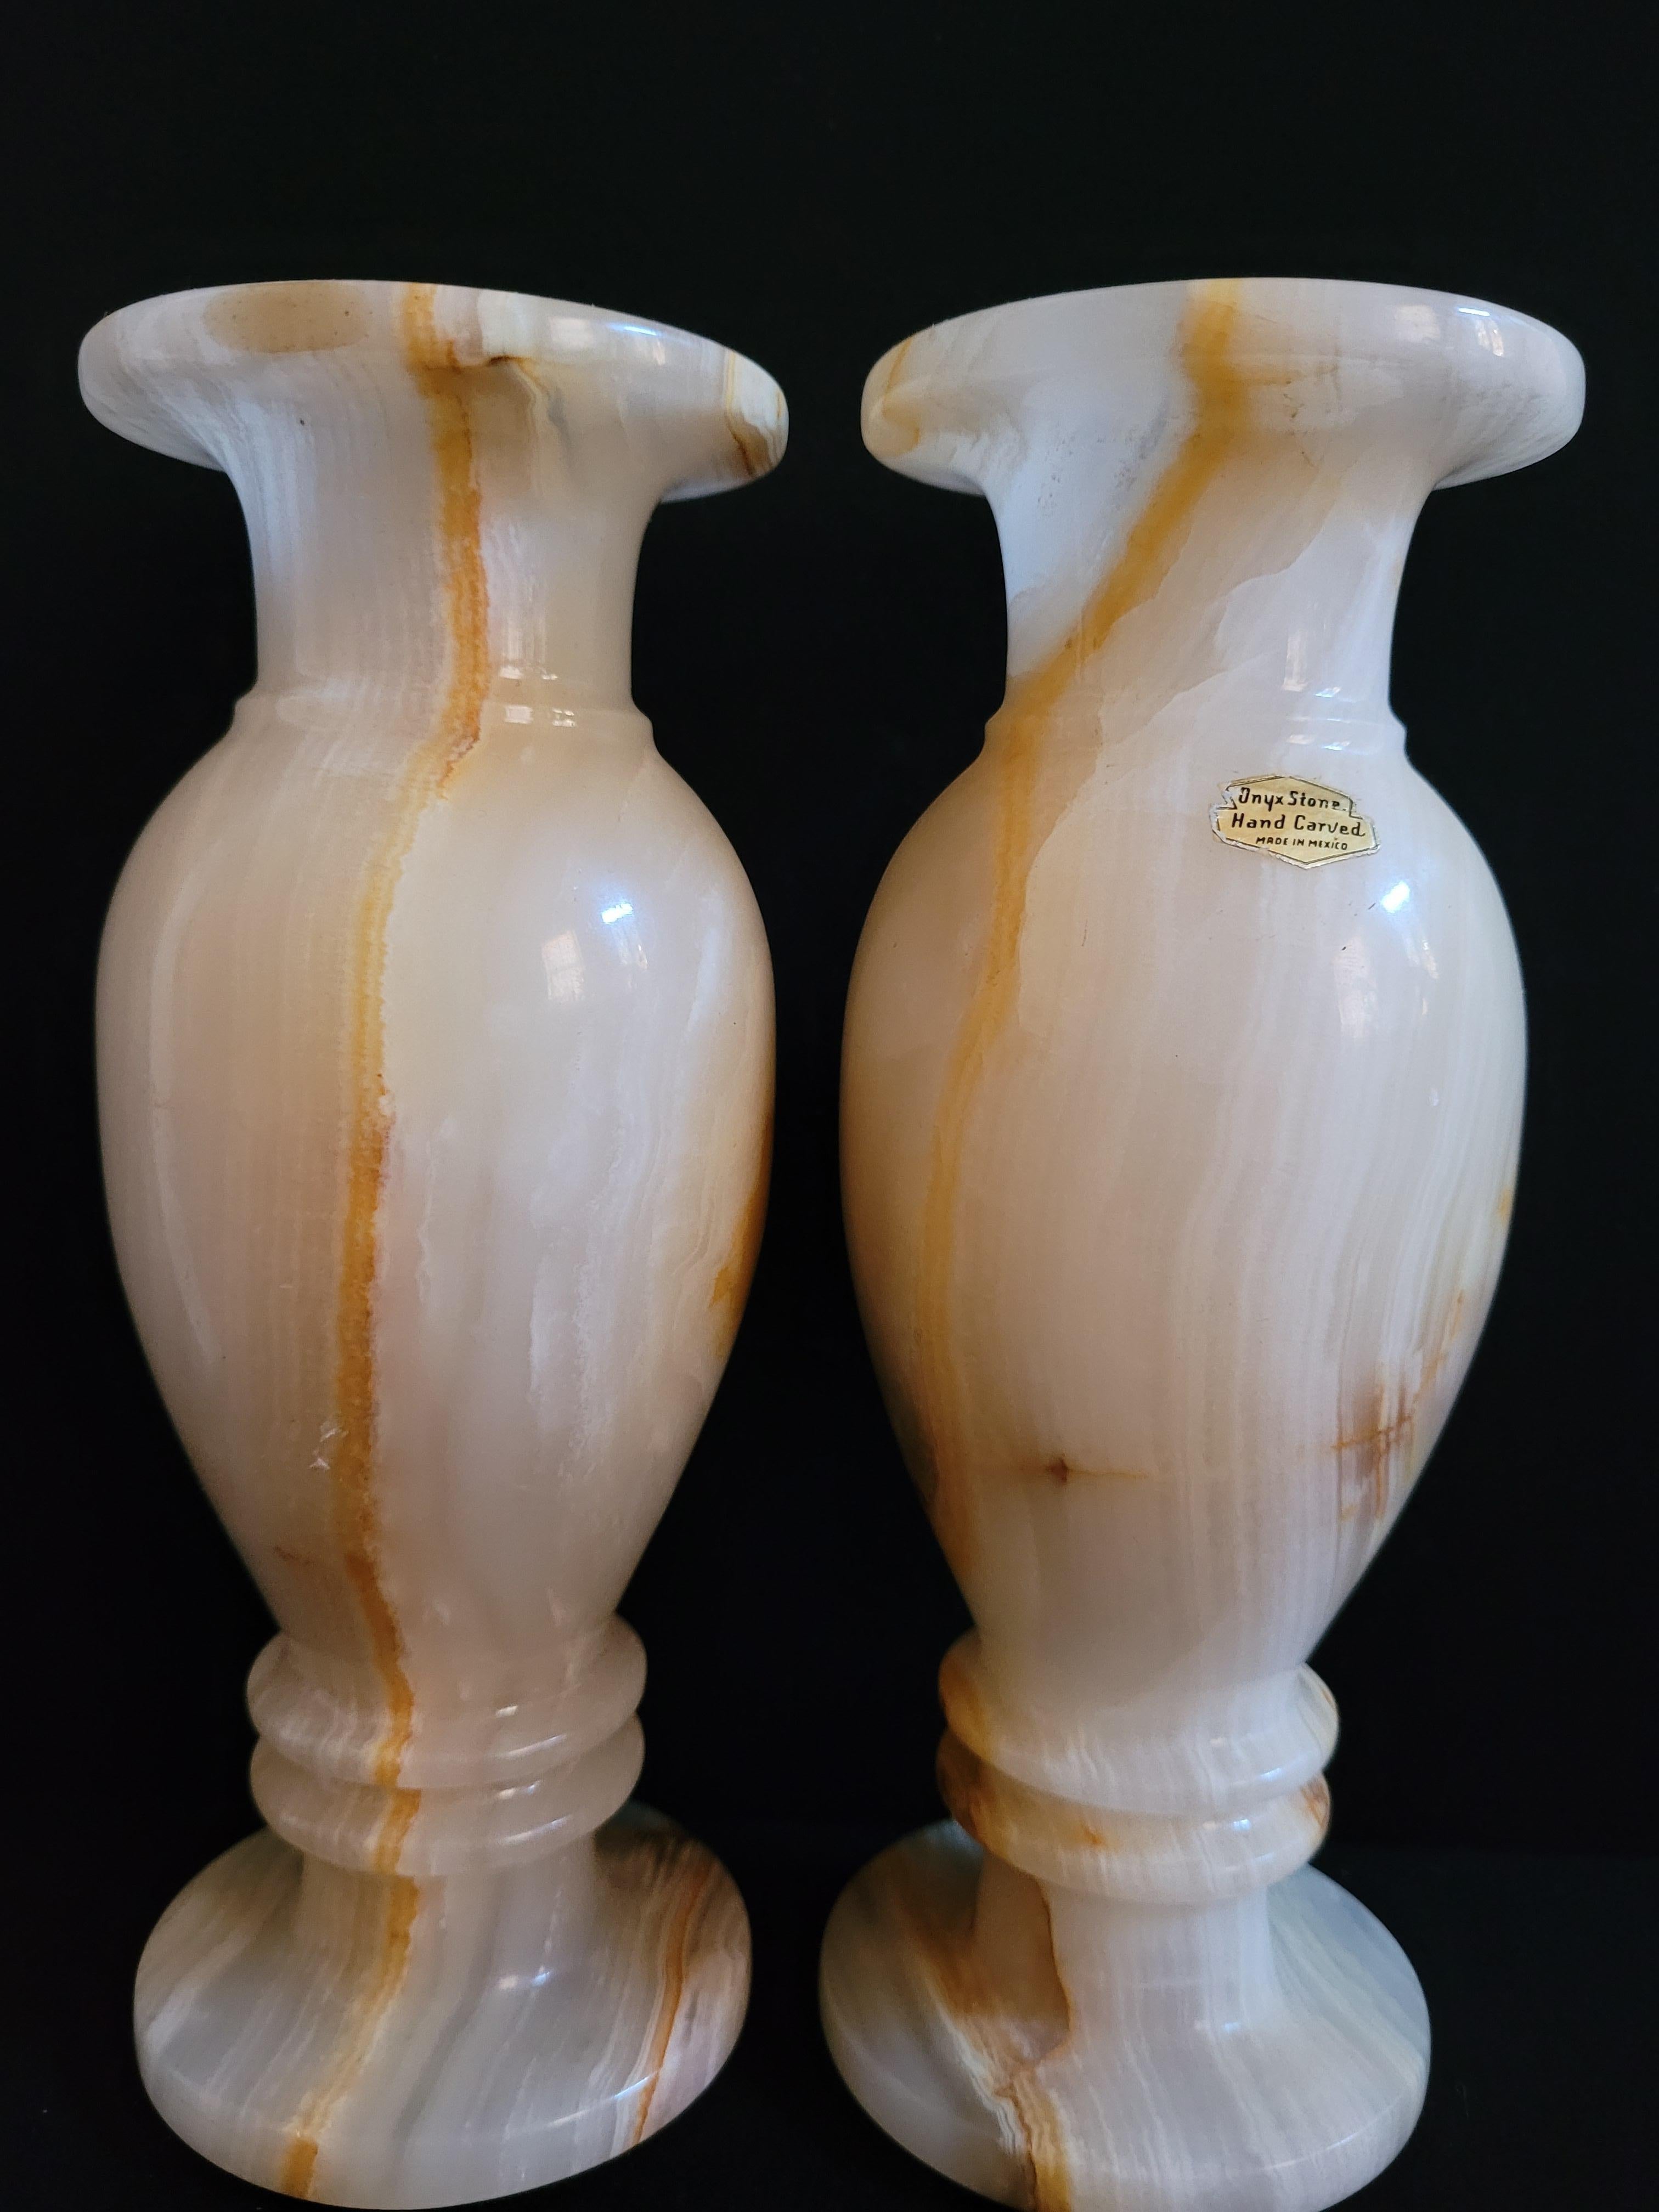 Beautiful vitange Mexican hand carved natural onyx stone decorative vase,brilliant condition.